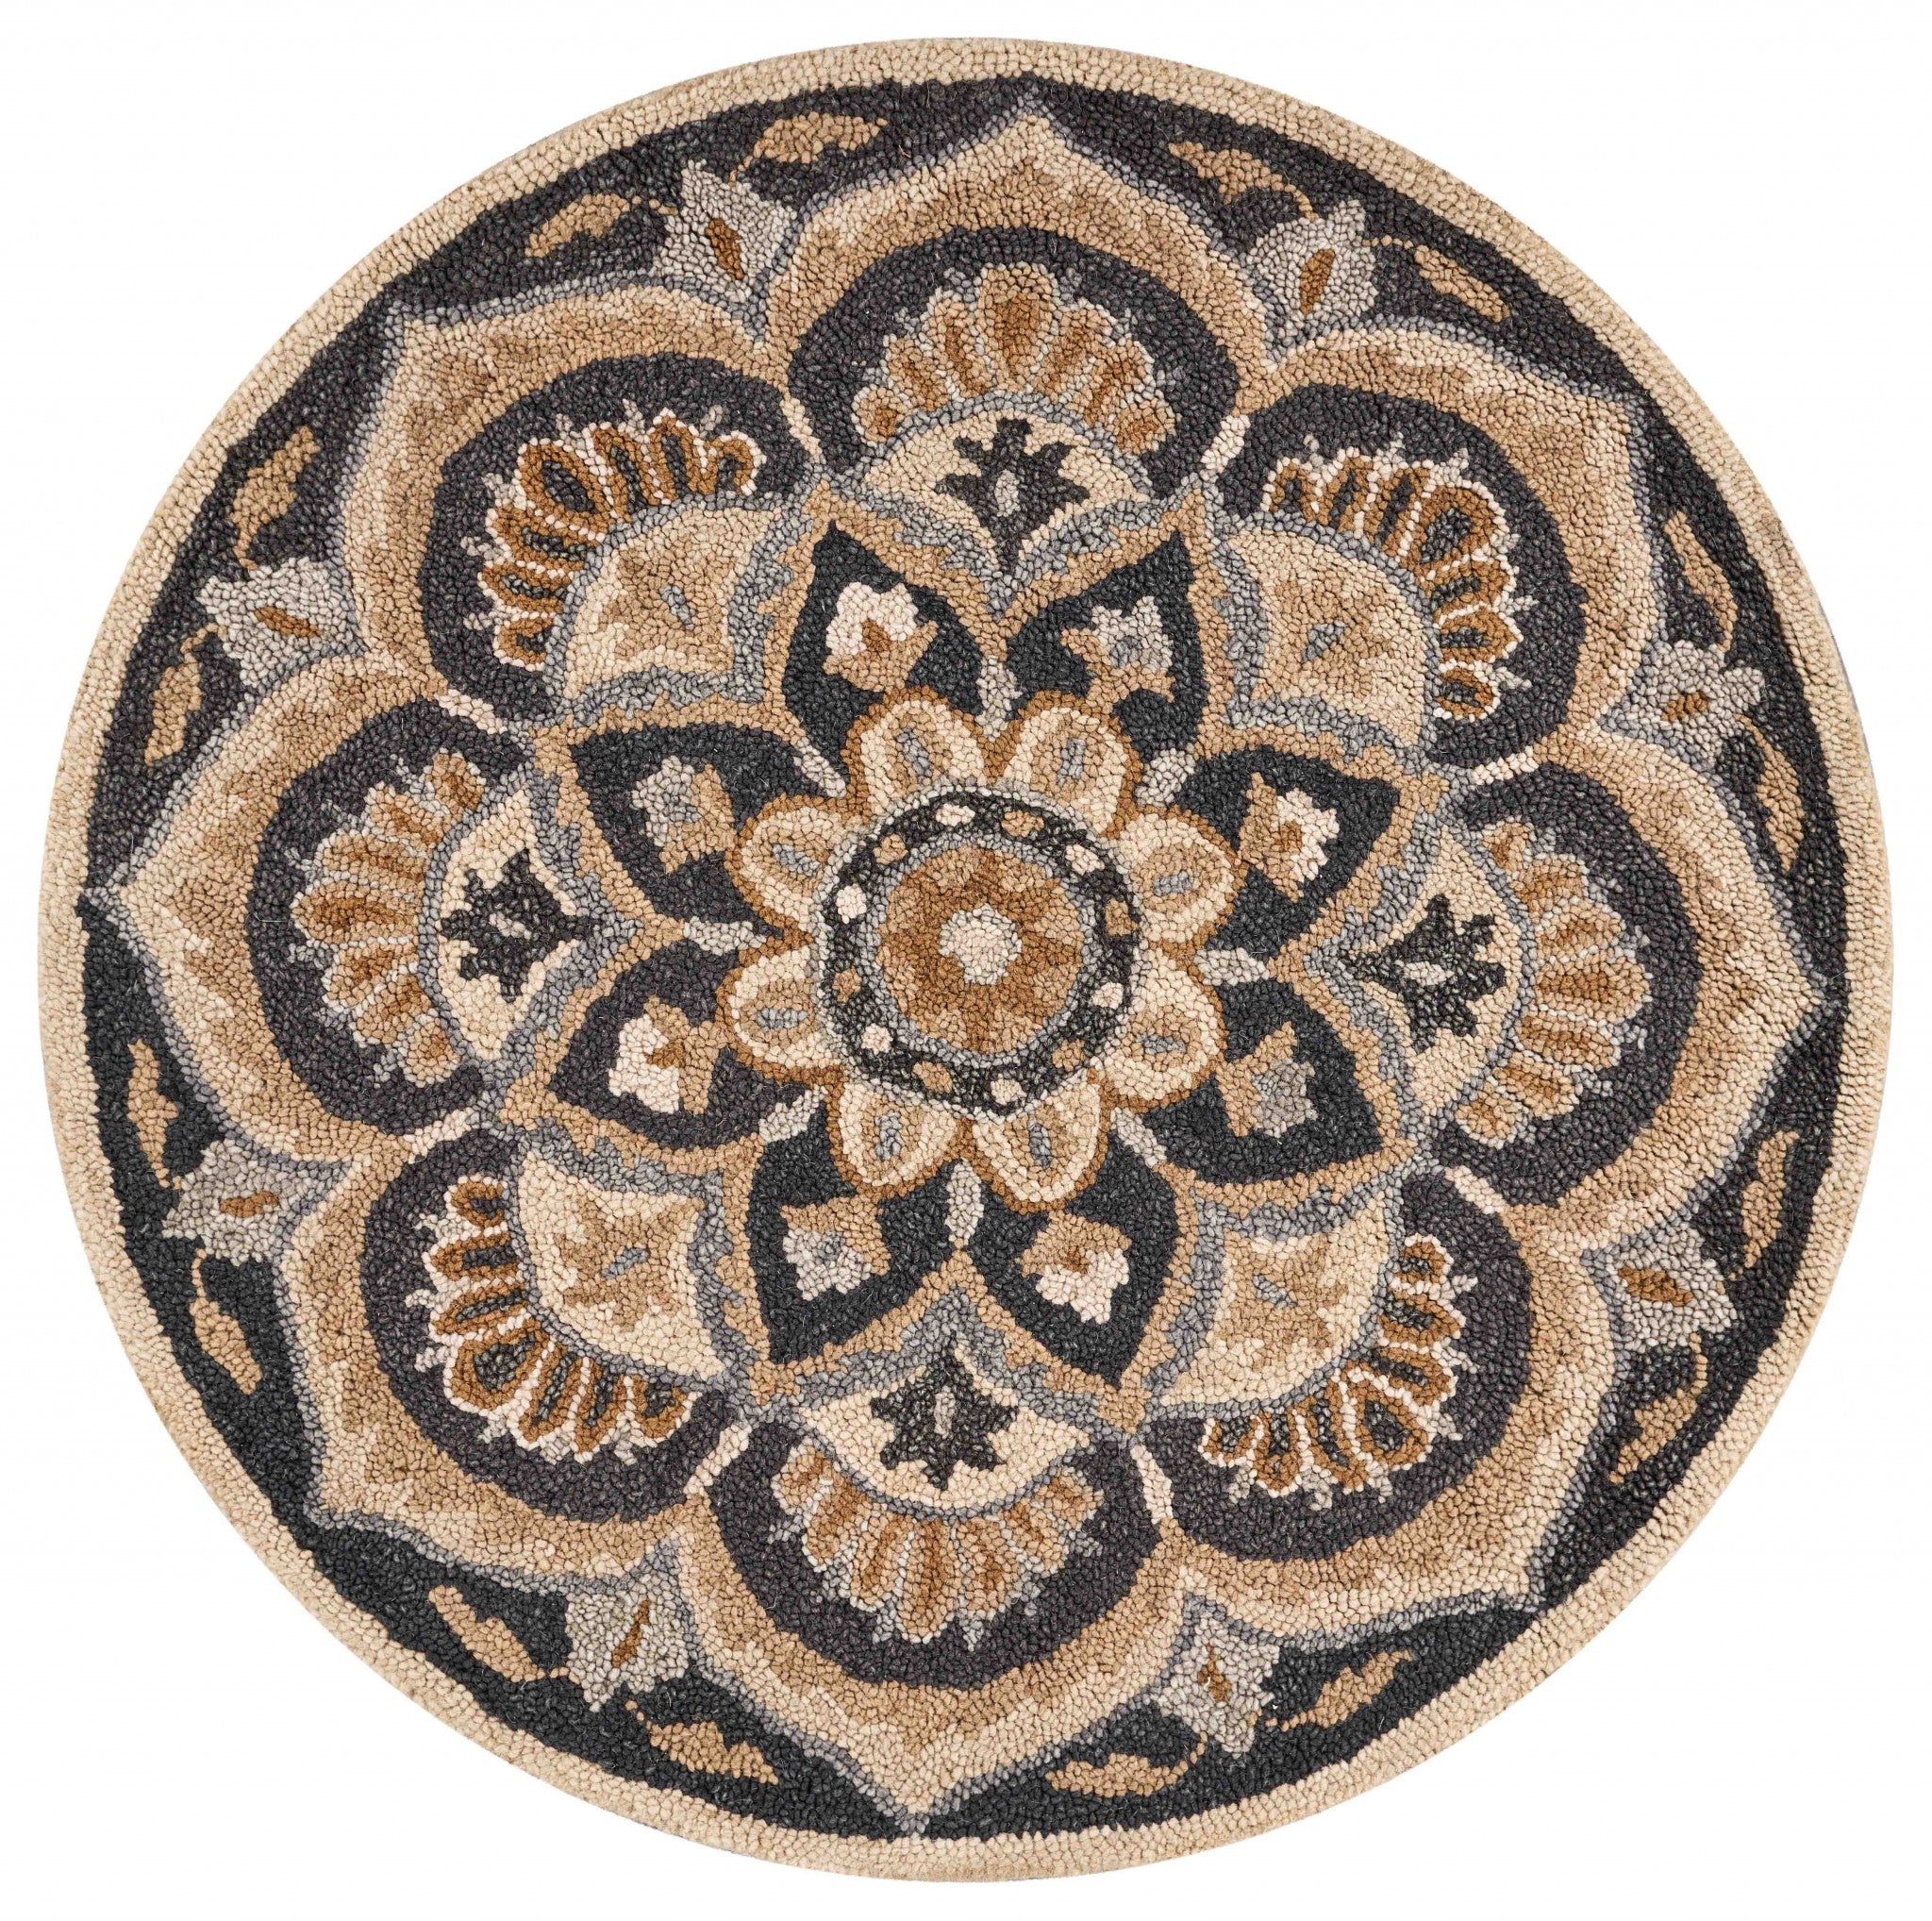 6' Black and Tan Round Wool Floral Medallion Hand Tufted Area Rug